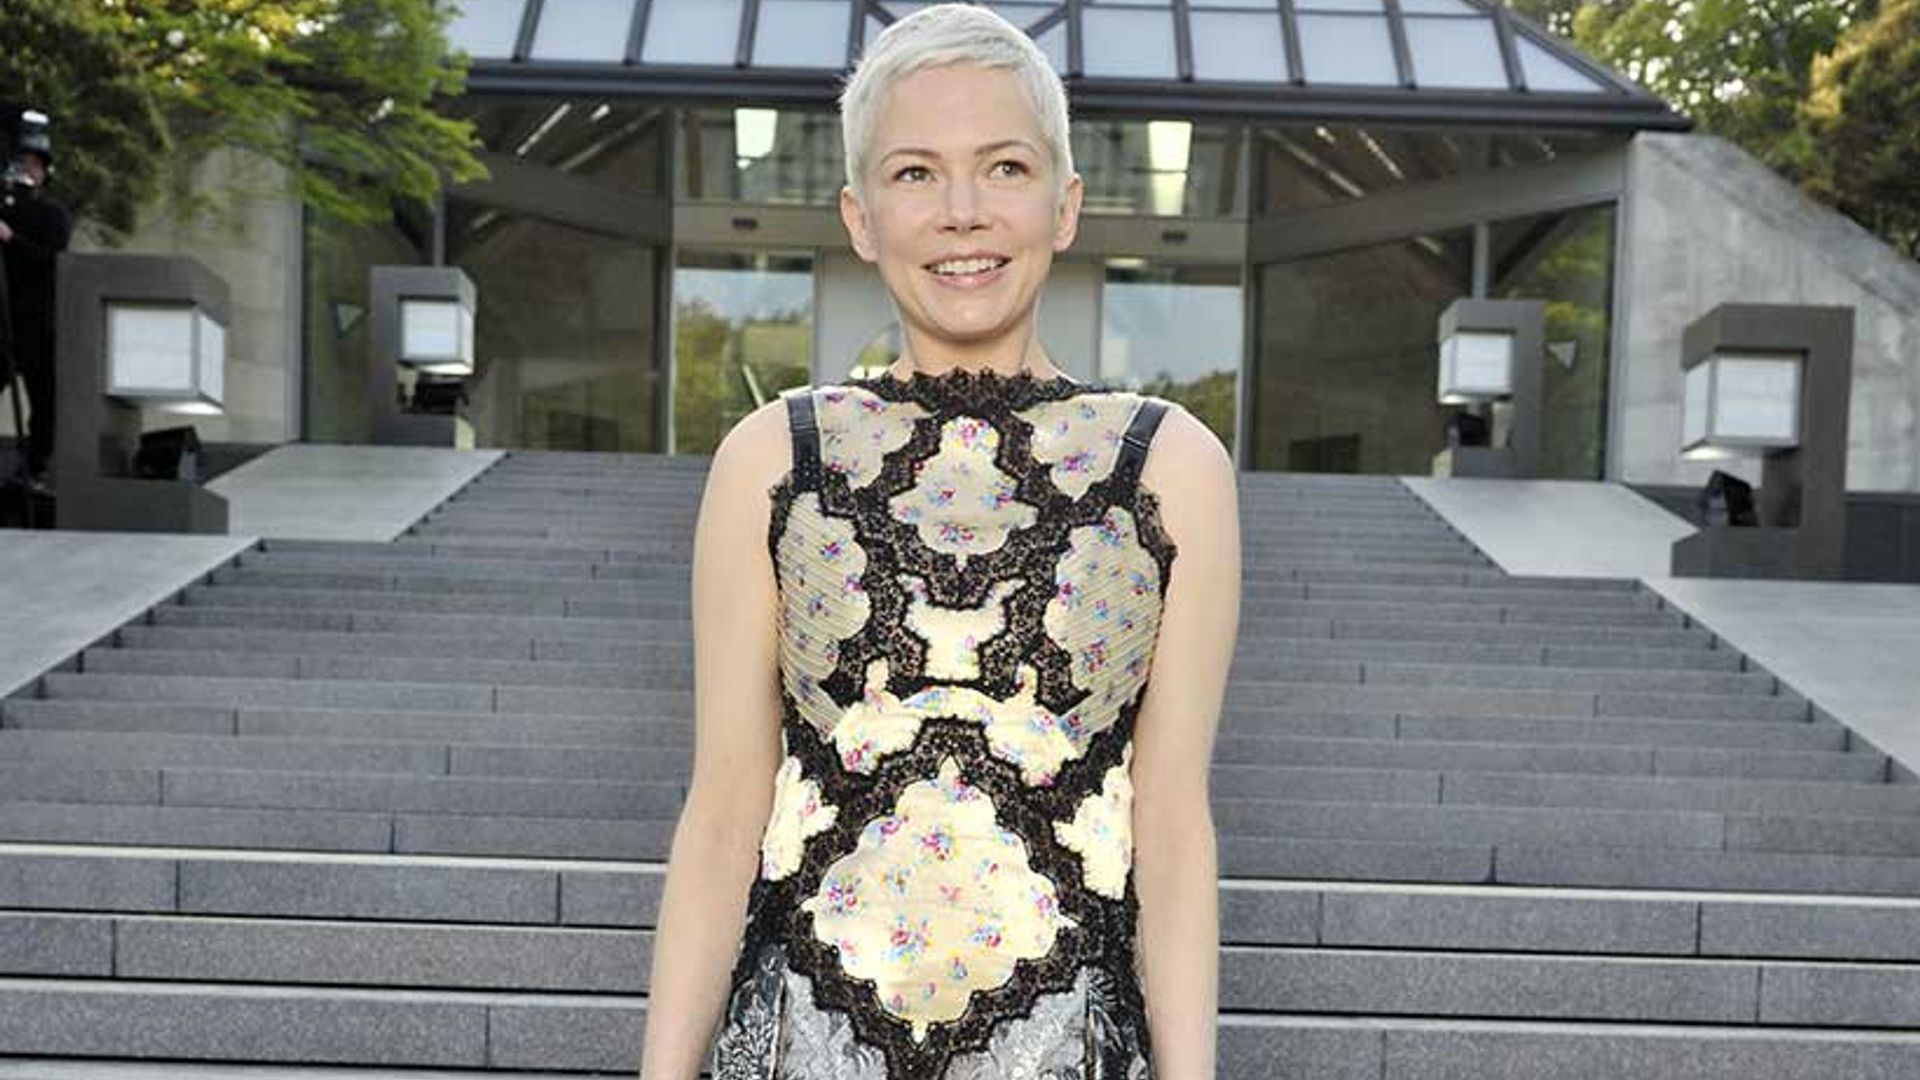 Michelle Williams wows in embellished cocktail dress at the Louis Vuitton Resort 2018 show